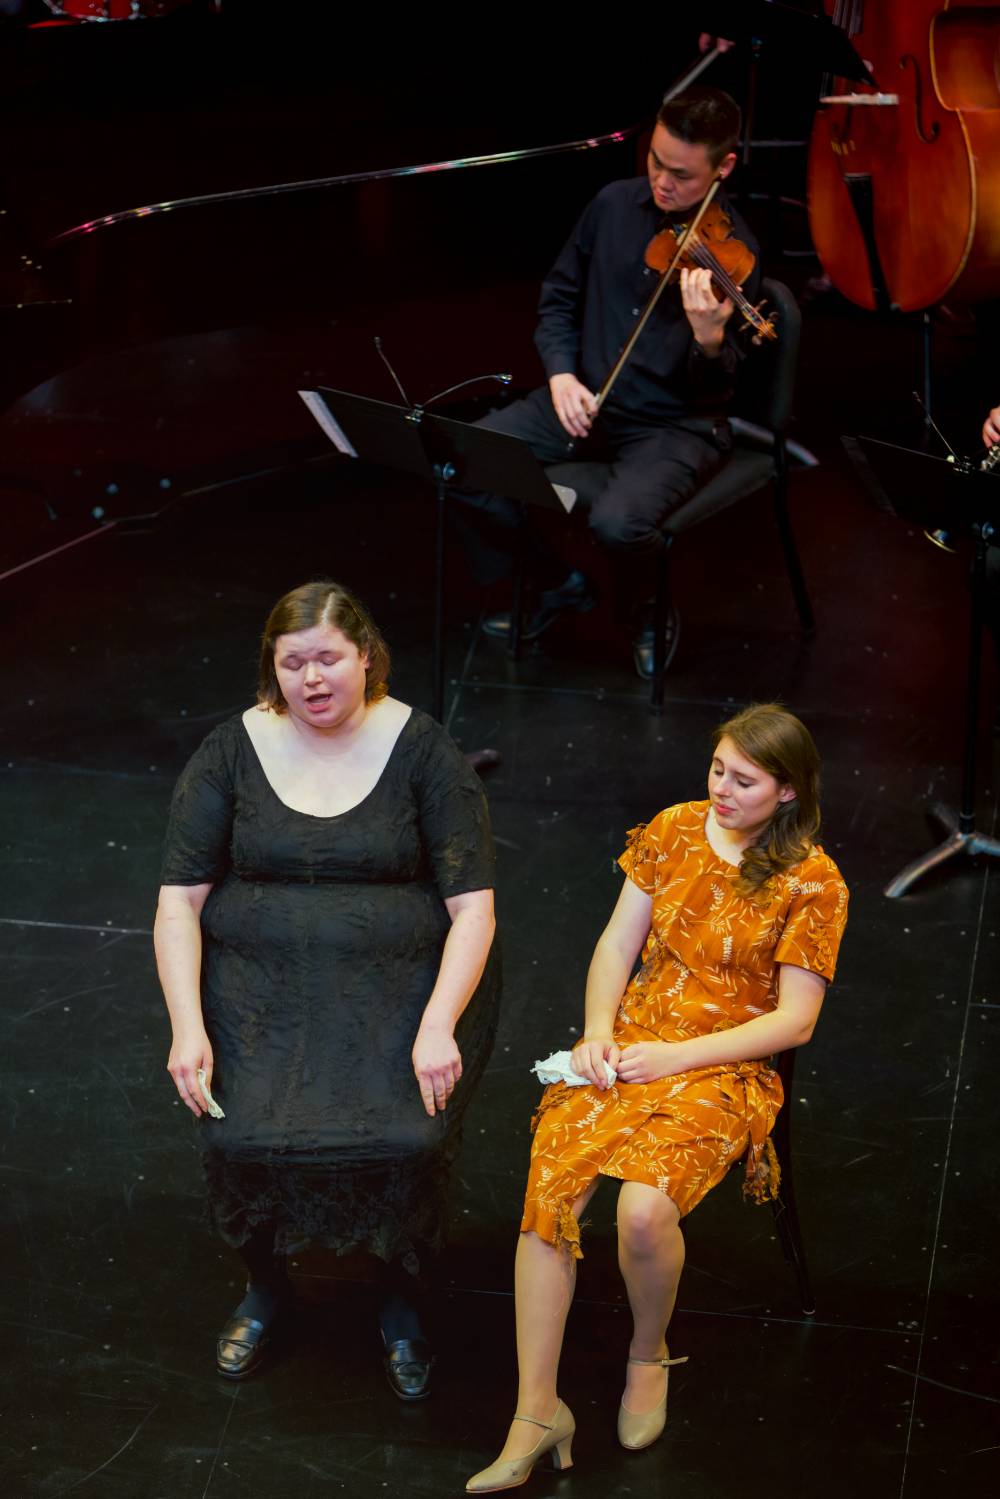 Two women singing and a man playing the violin.